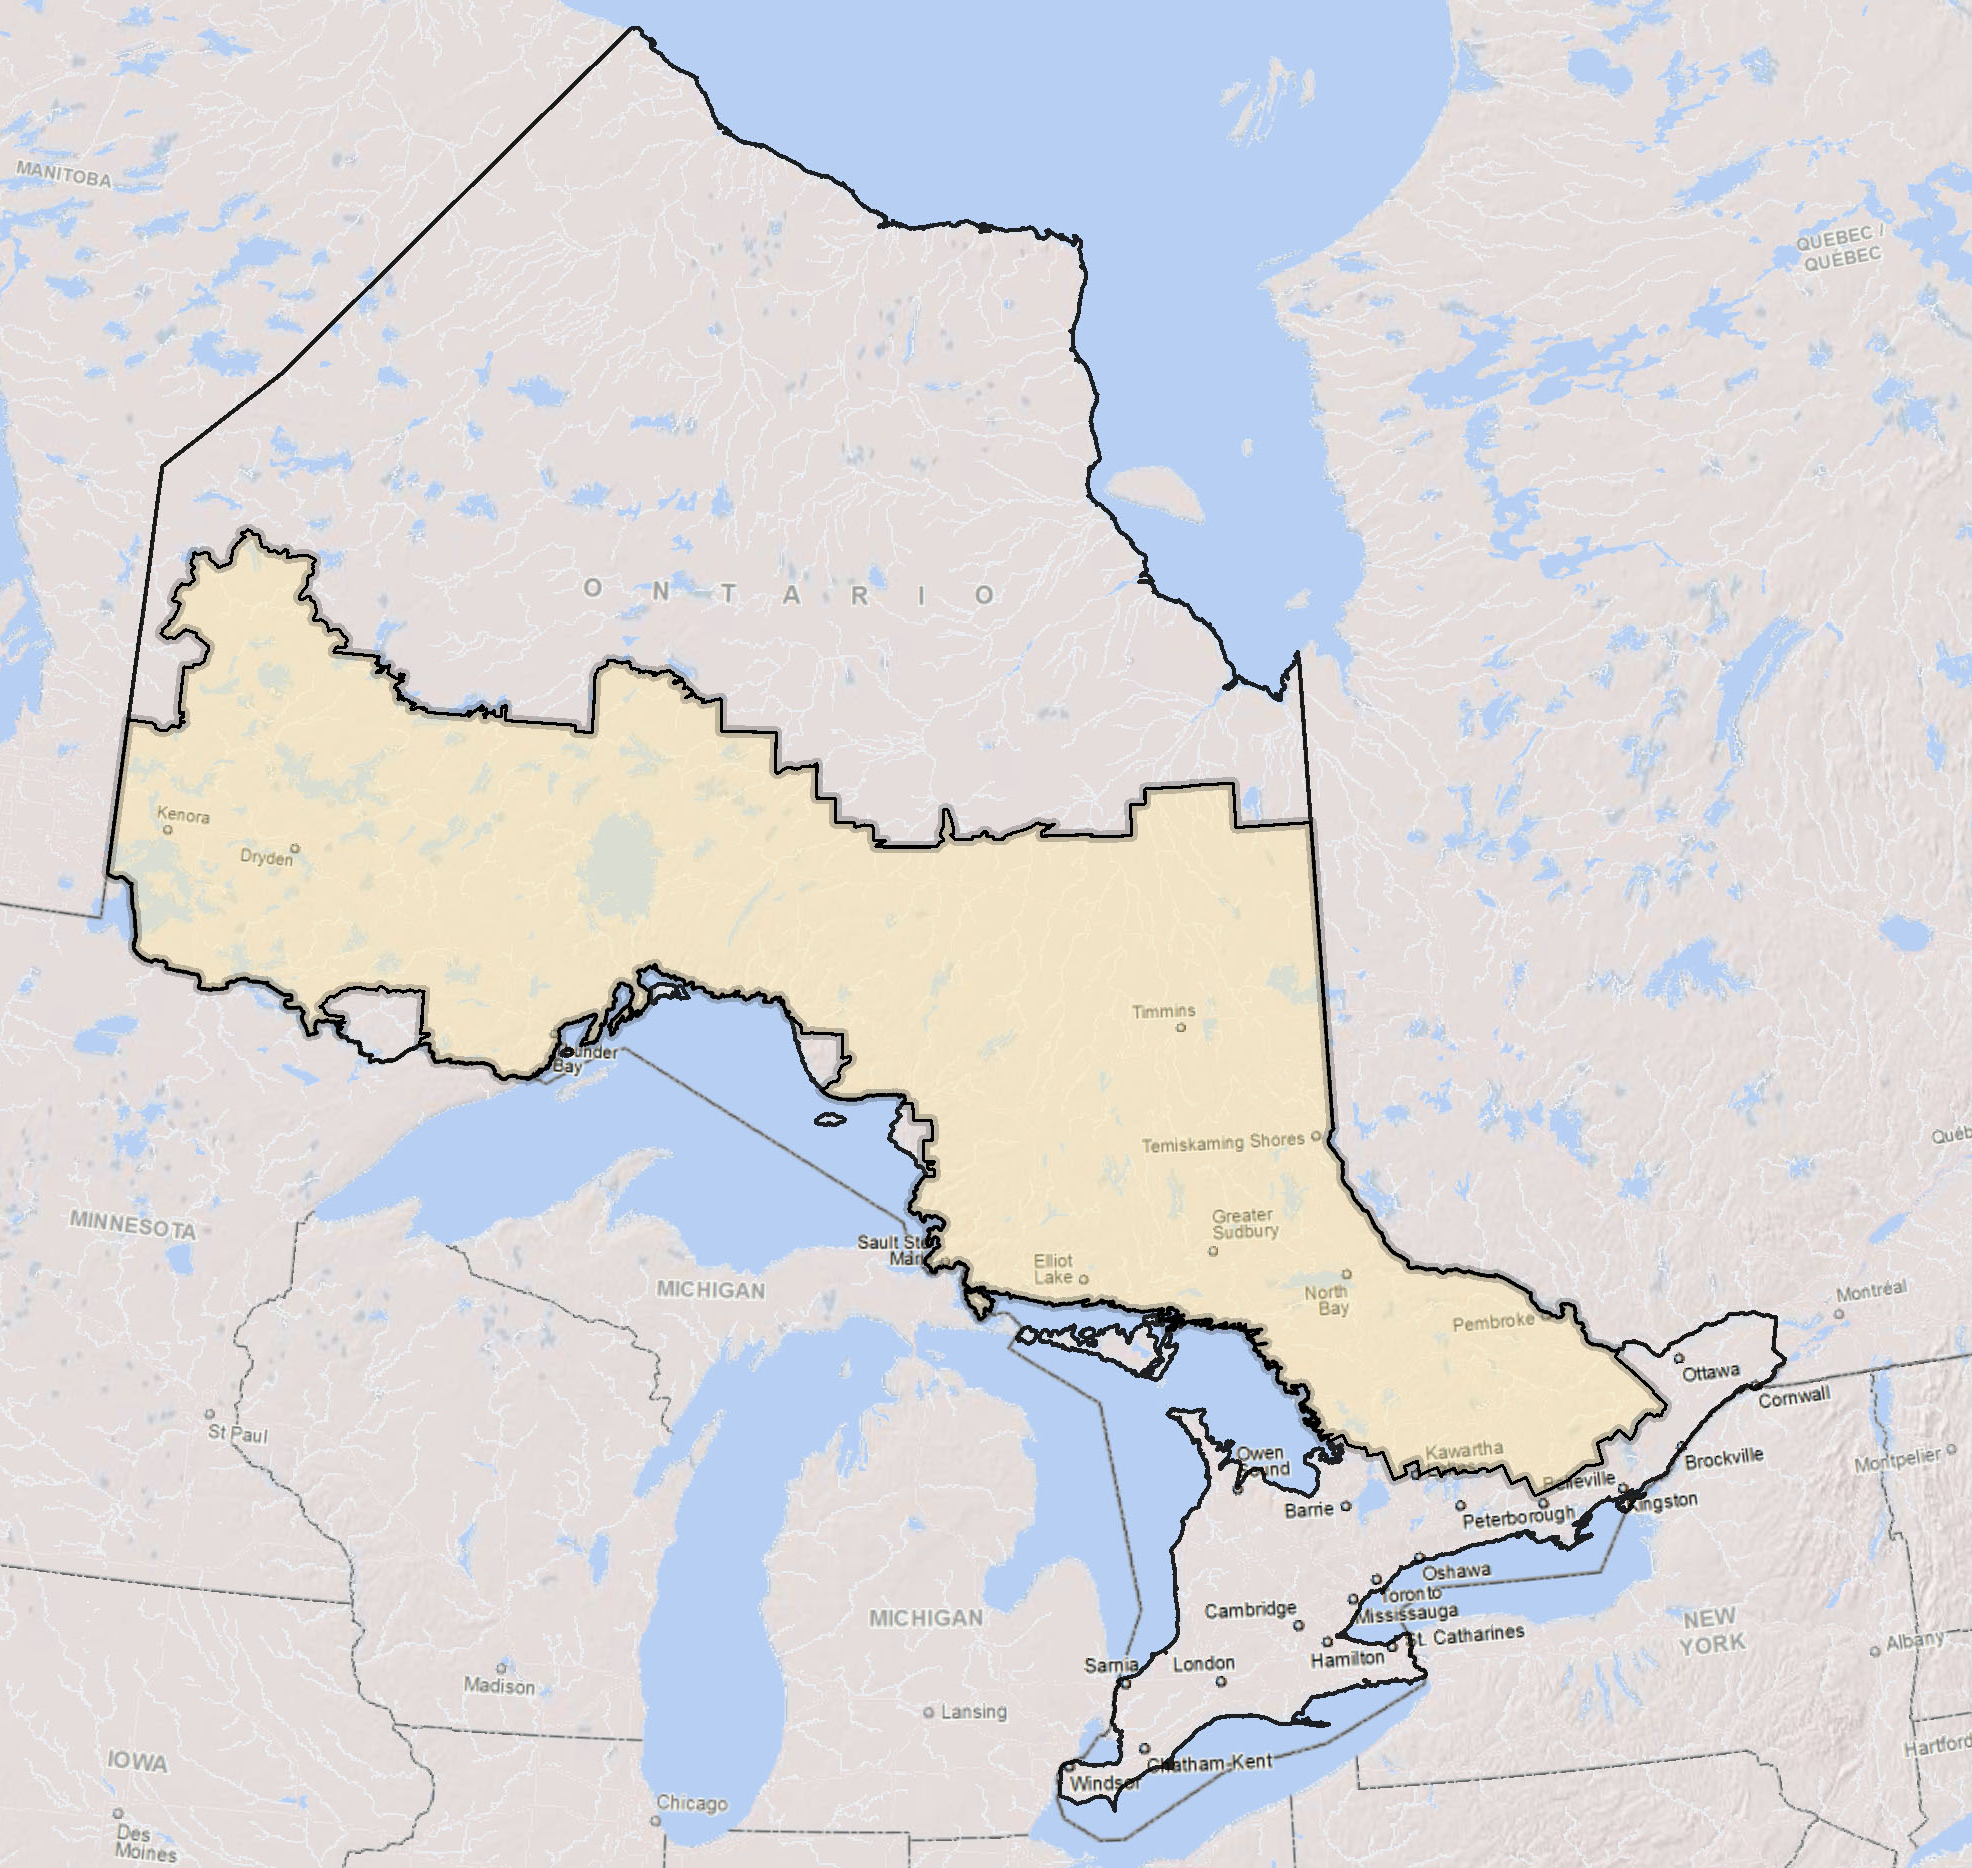 map of Ontario showing the boundary of the Area of the Undertaking.